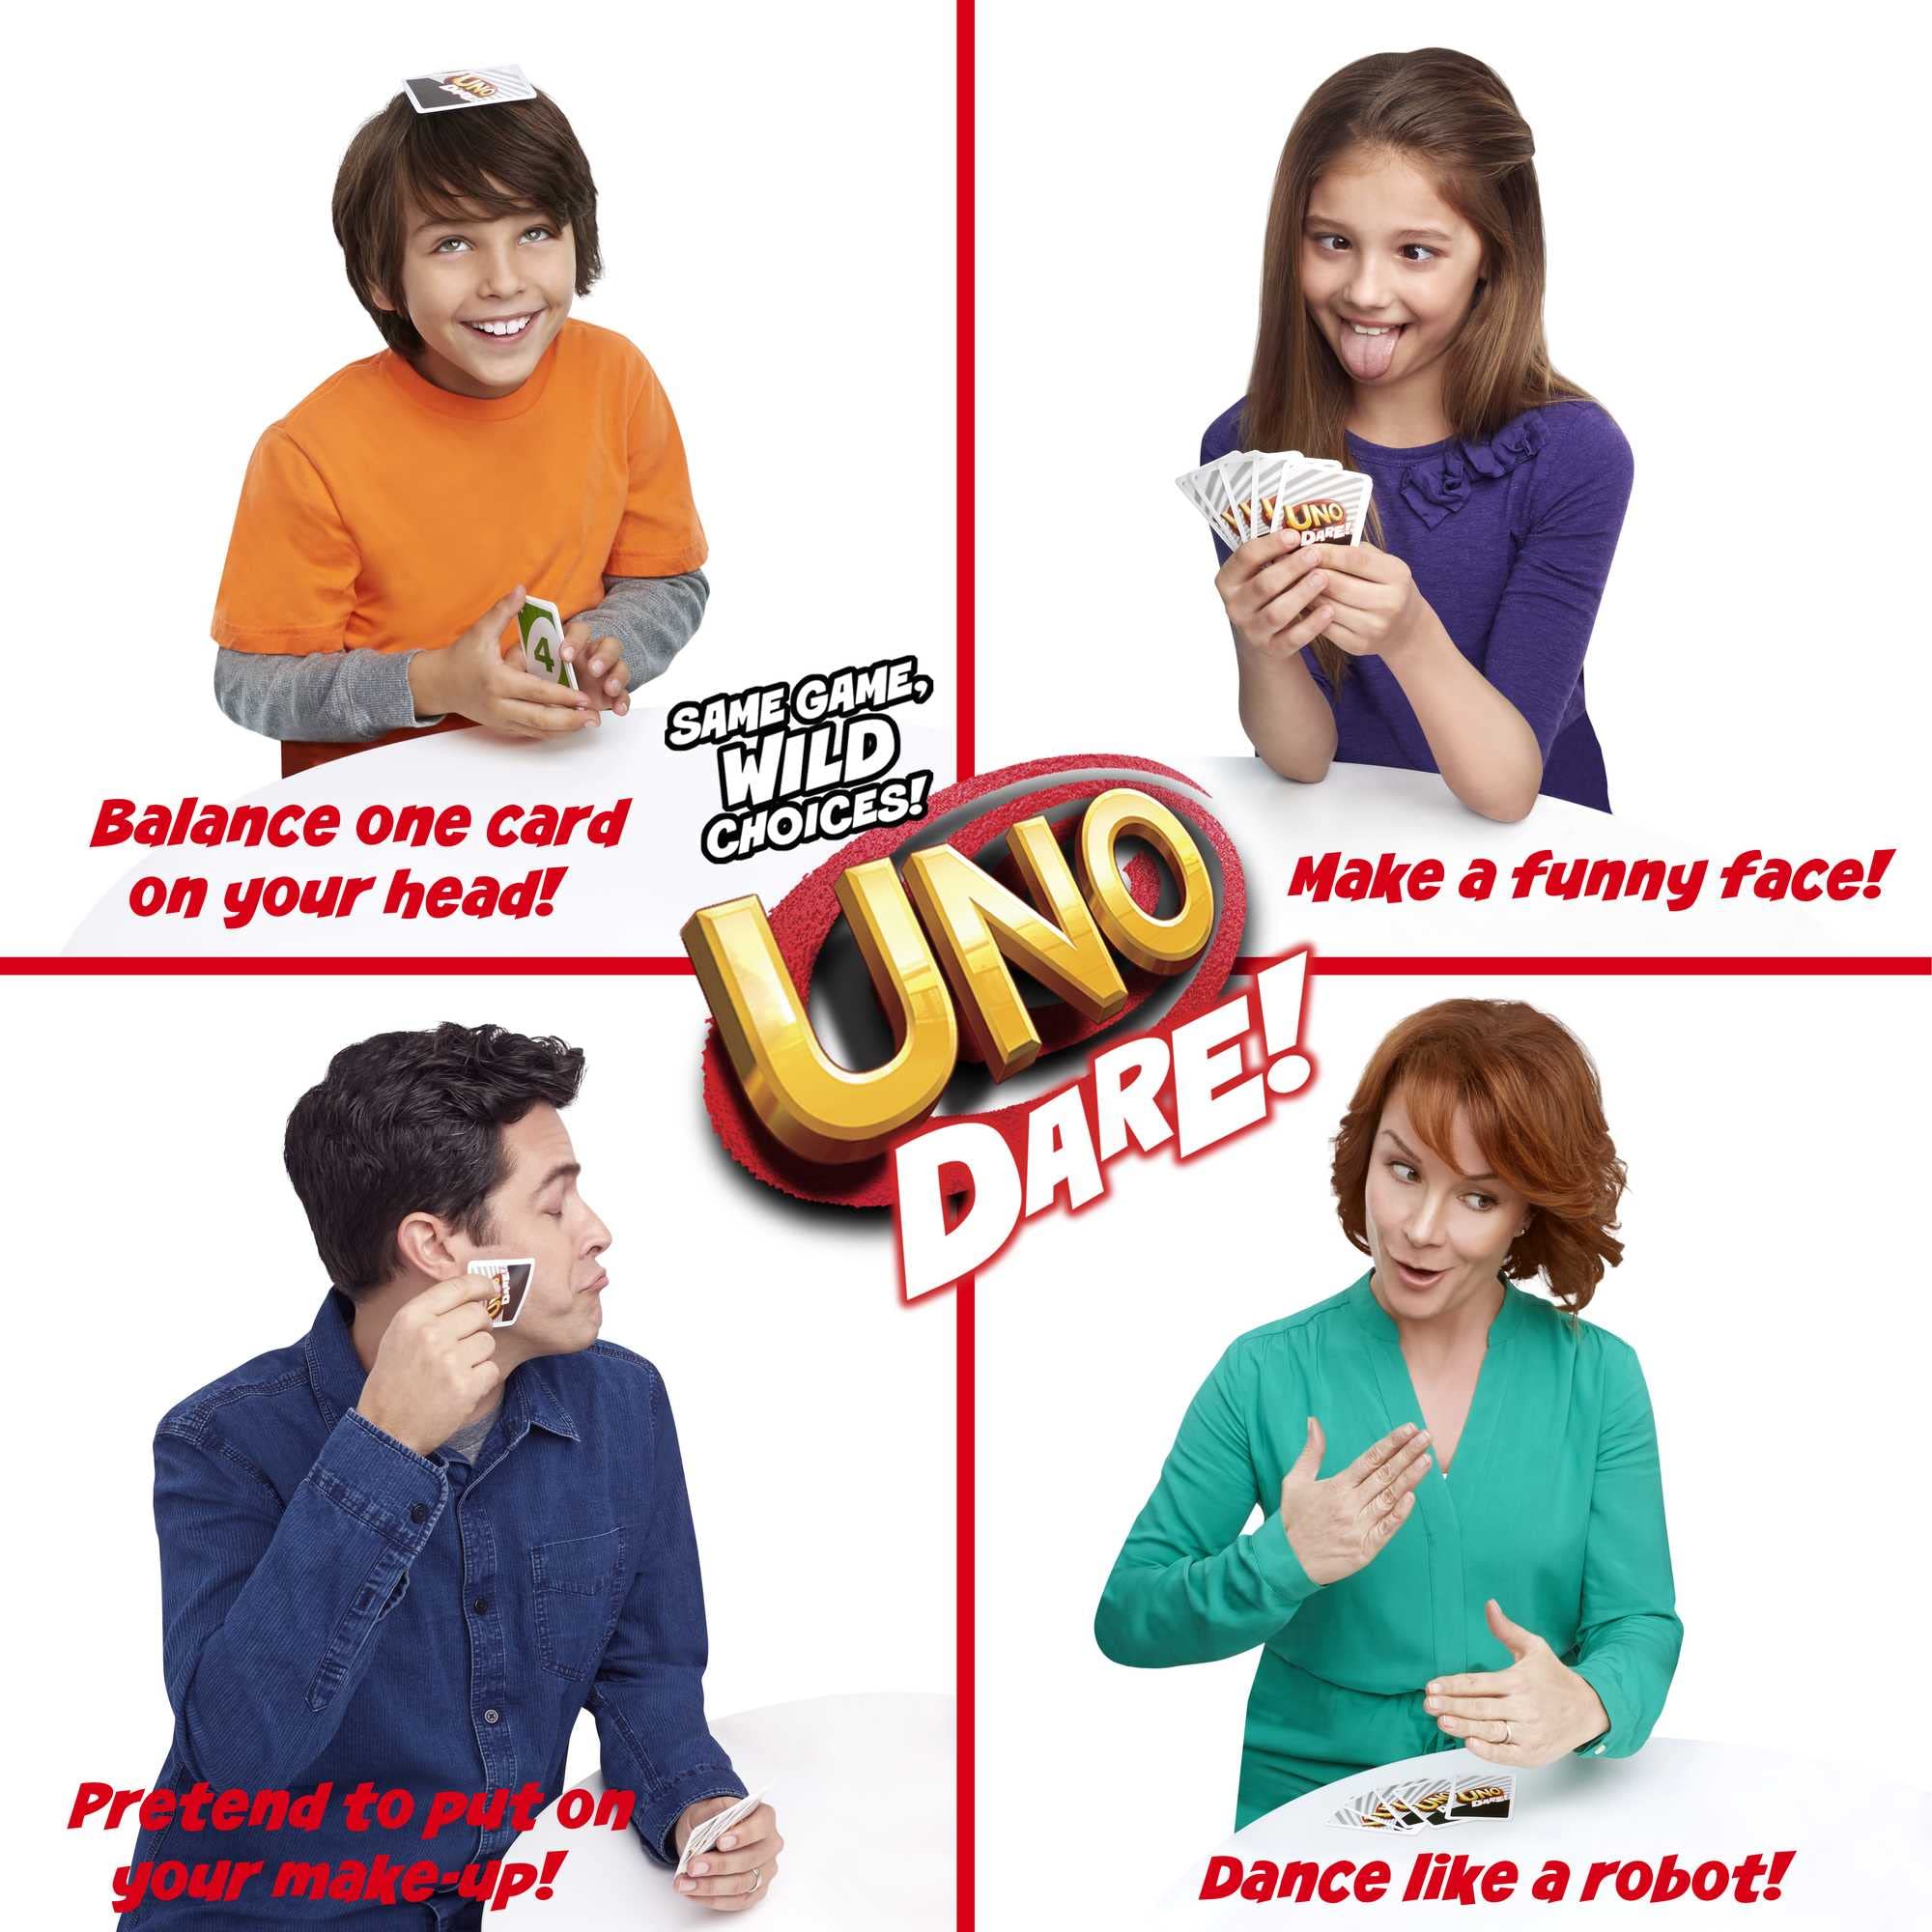 Mattel Games ​UNO Dare Card Game for Family Night Featuring Challenging and Silly Dares from 3 Different Categories